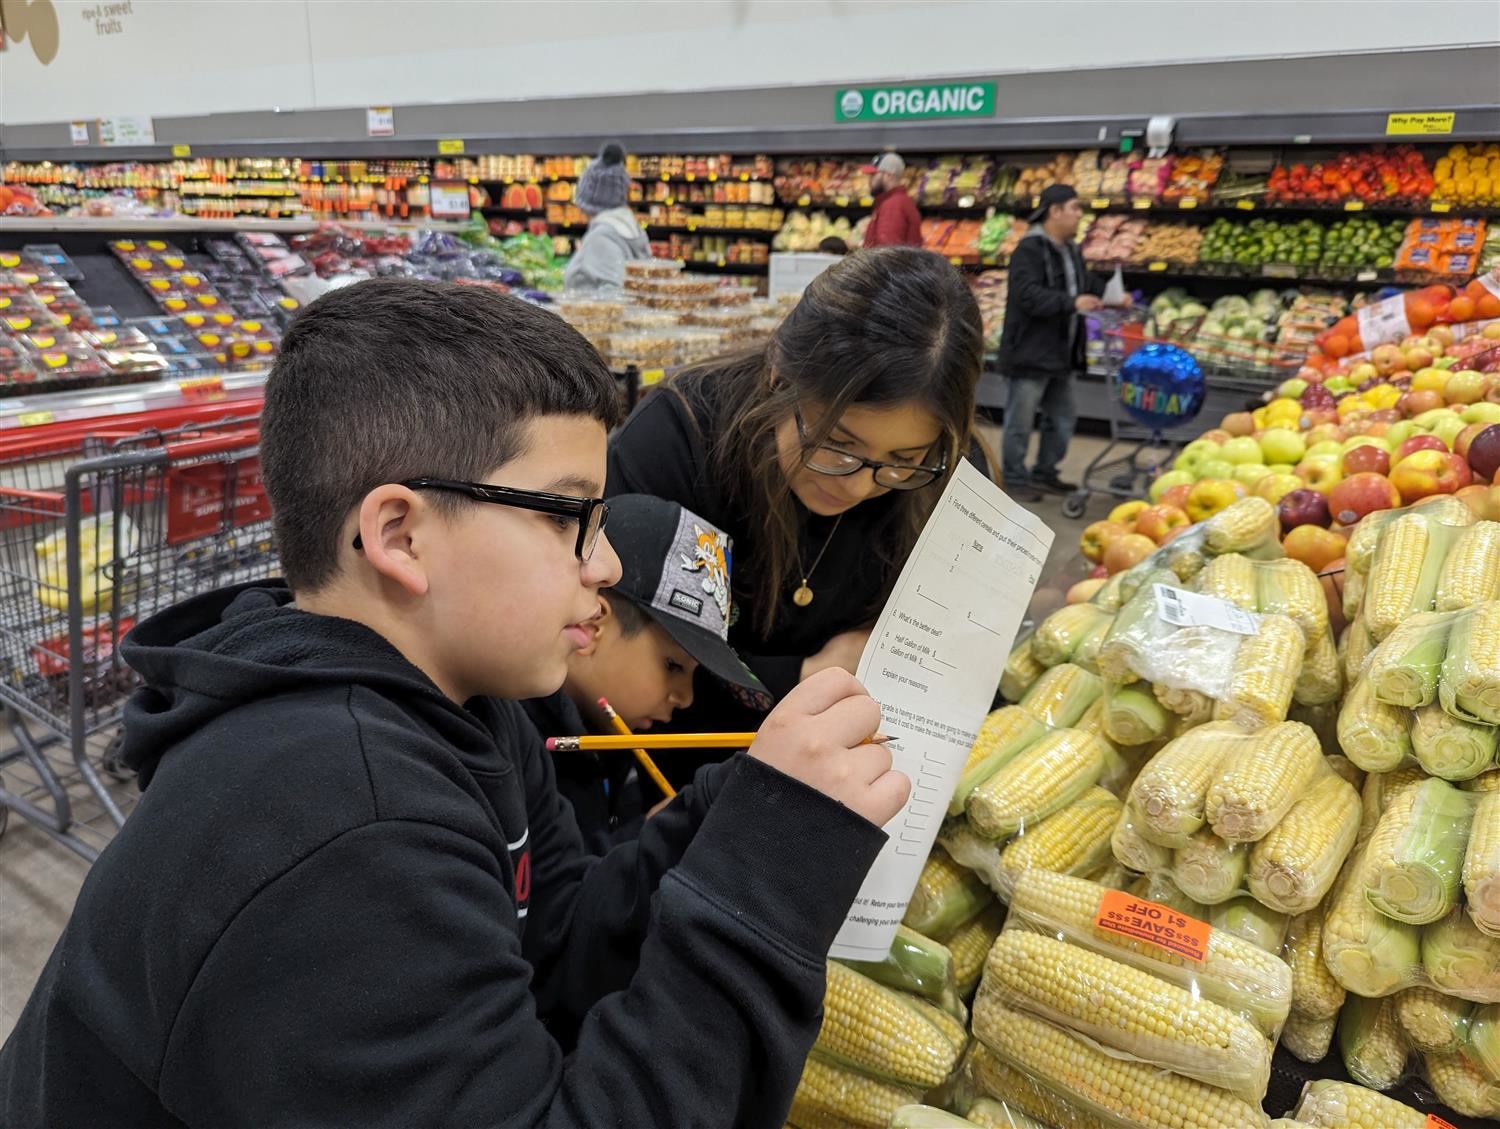 Wasmer family working on math problems with bananas at Super Saver.